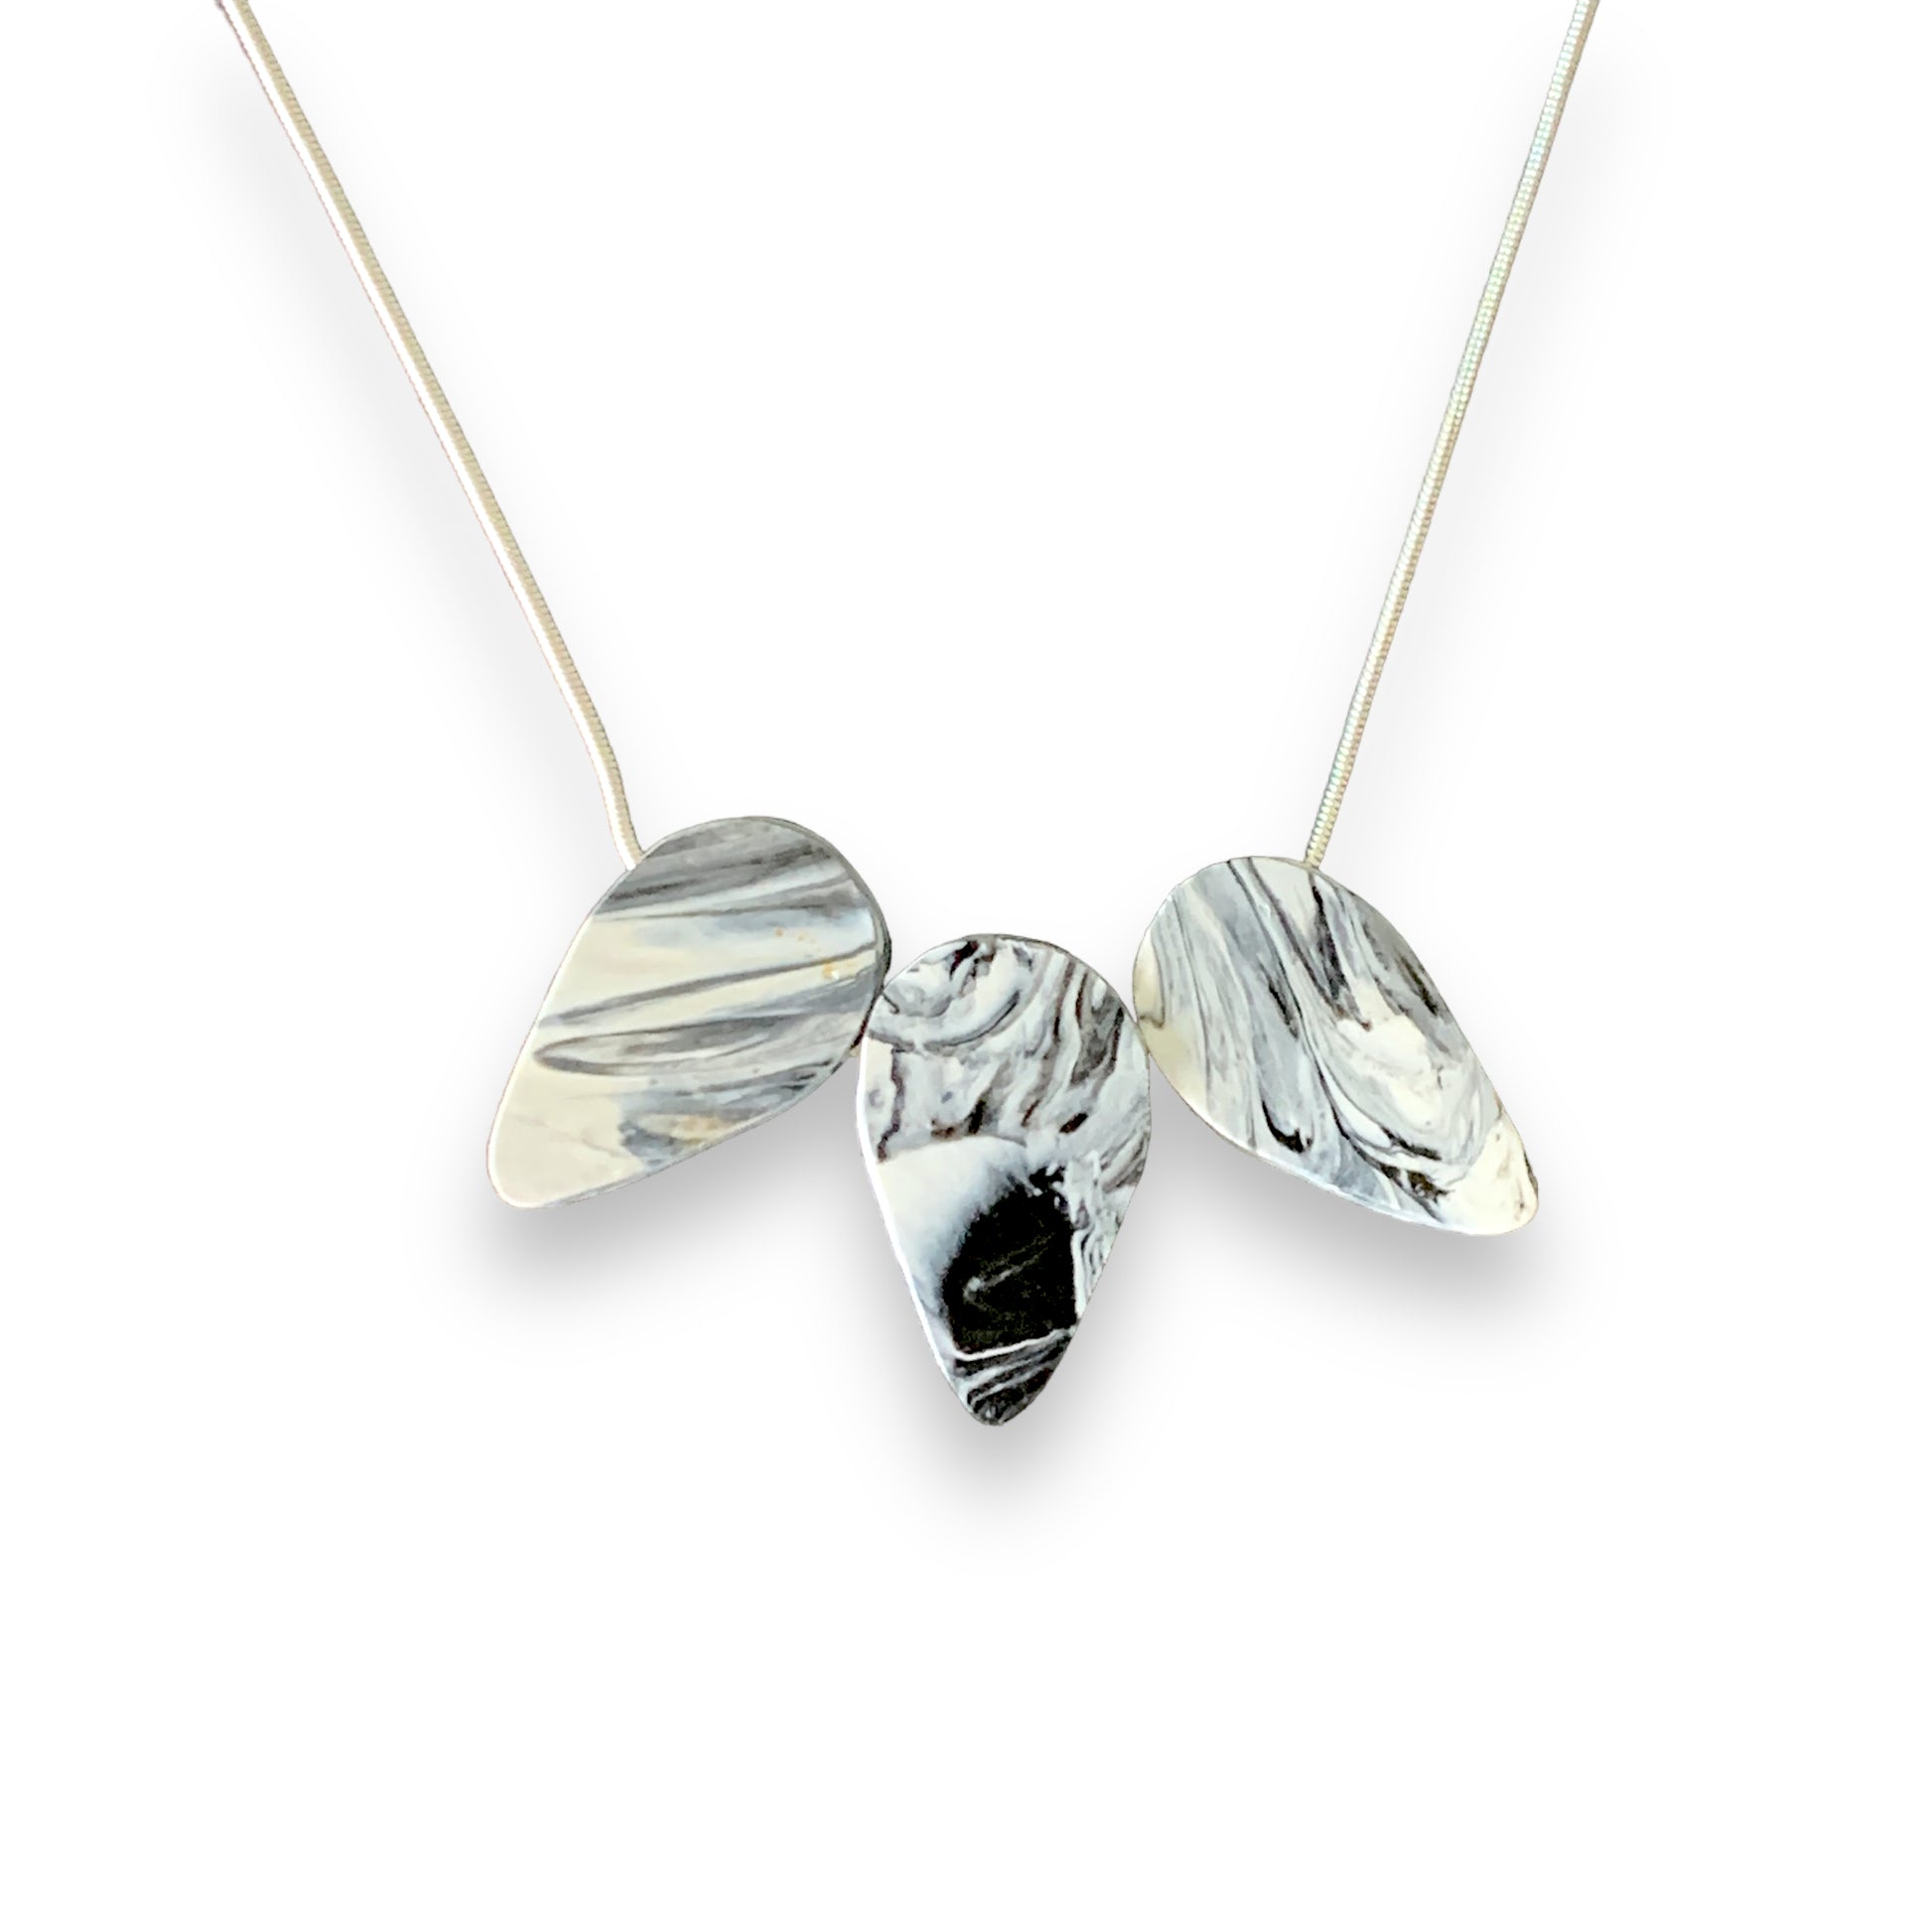 Black and white teardrop necklace handmade in London from recycled single use plastic perfect gift awards 2023